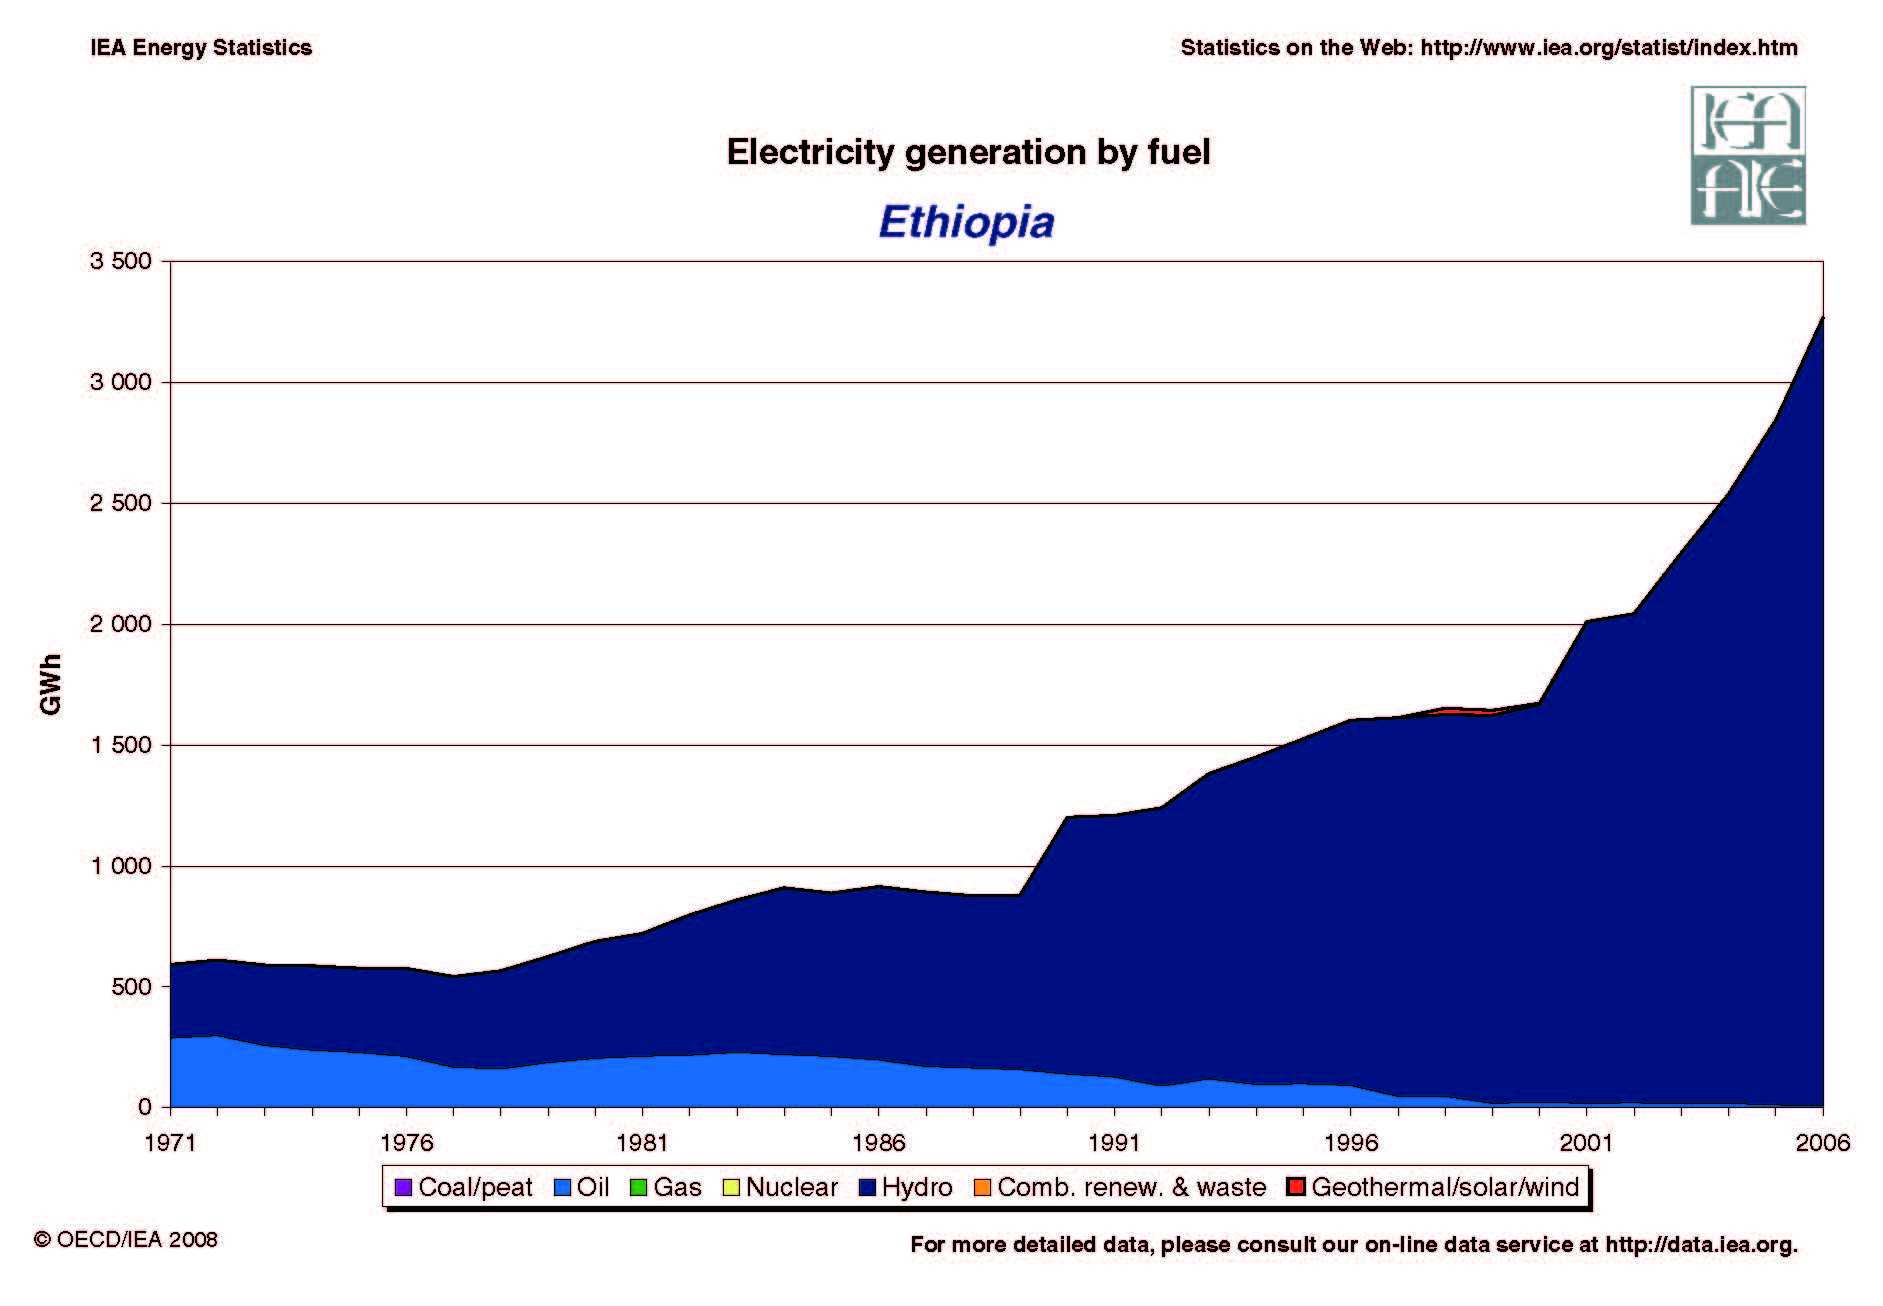 Ethiopia Evolution of Electricity Generation by Fuel 1971 - 2005